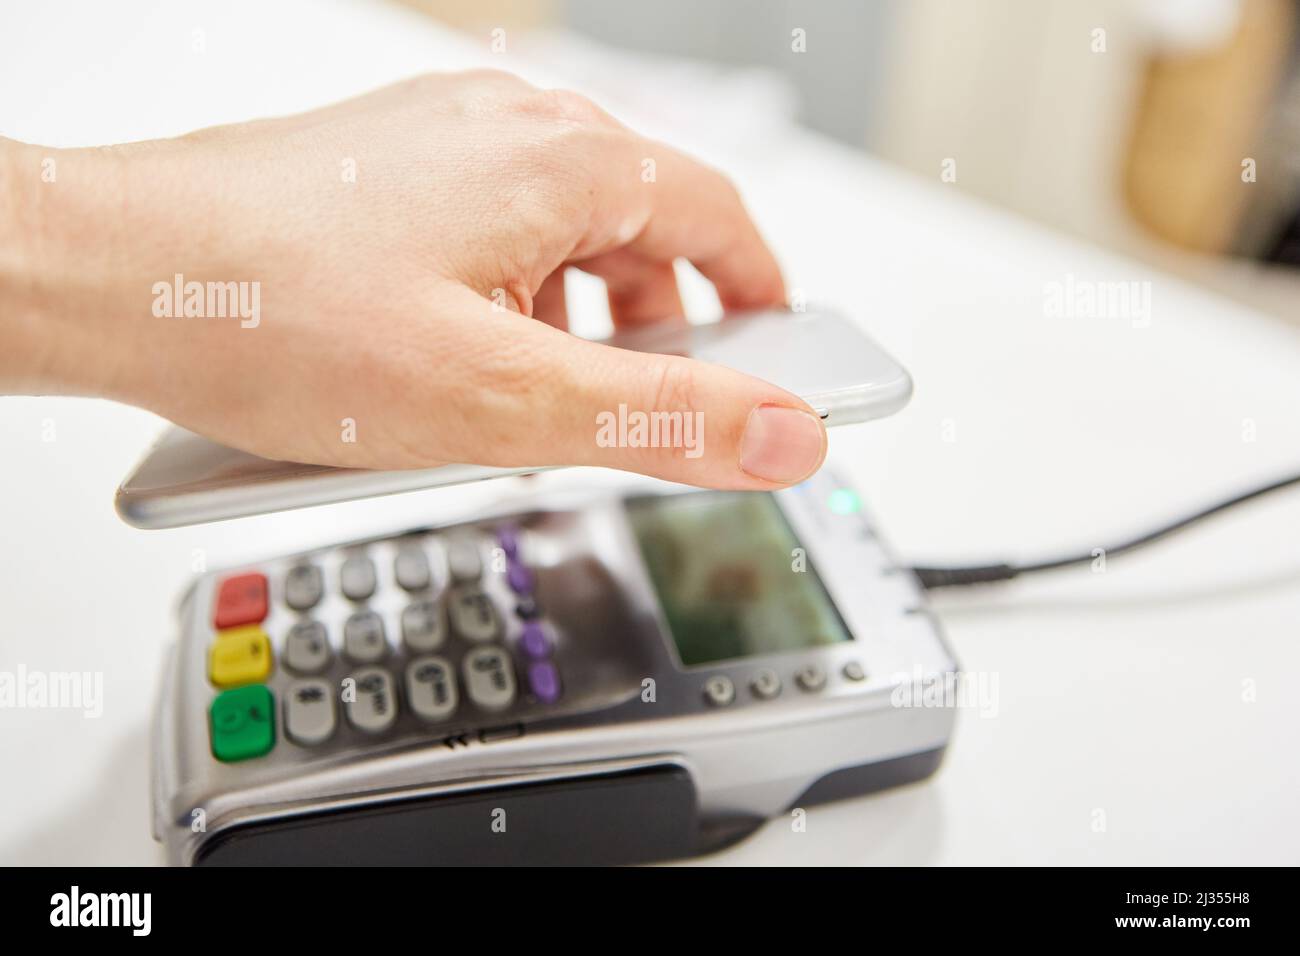 Contactless payment as a service in retail with smartphone app and NFC reader Stock Photo